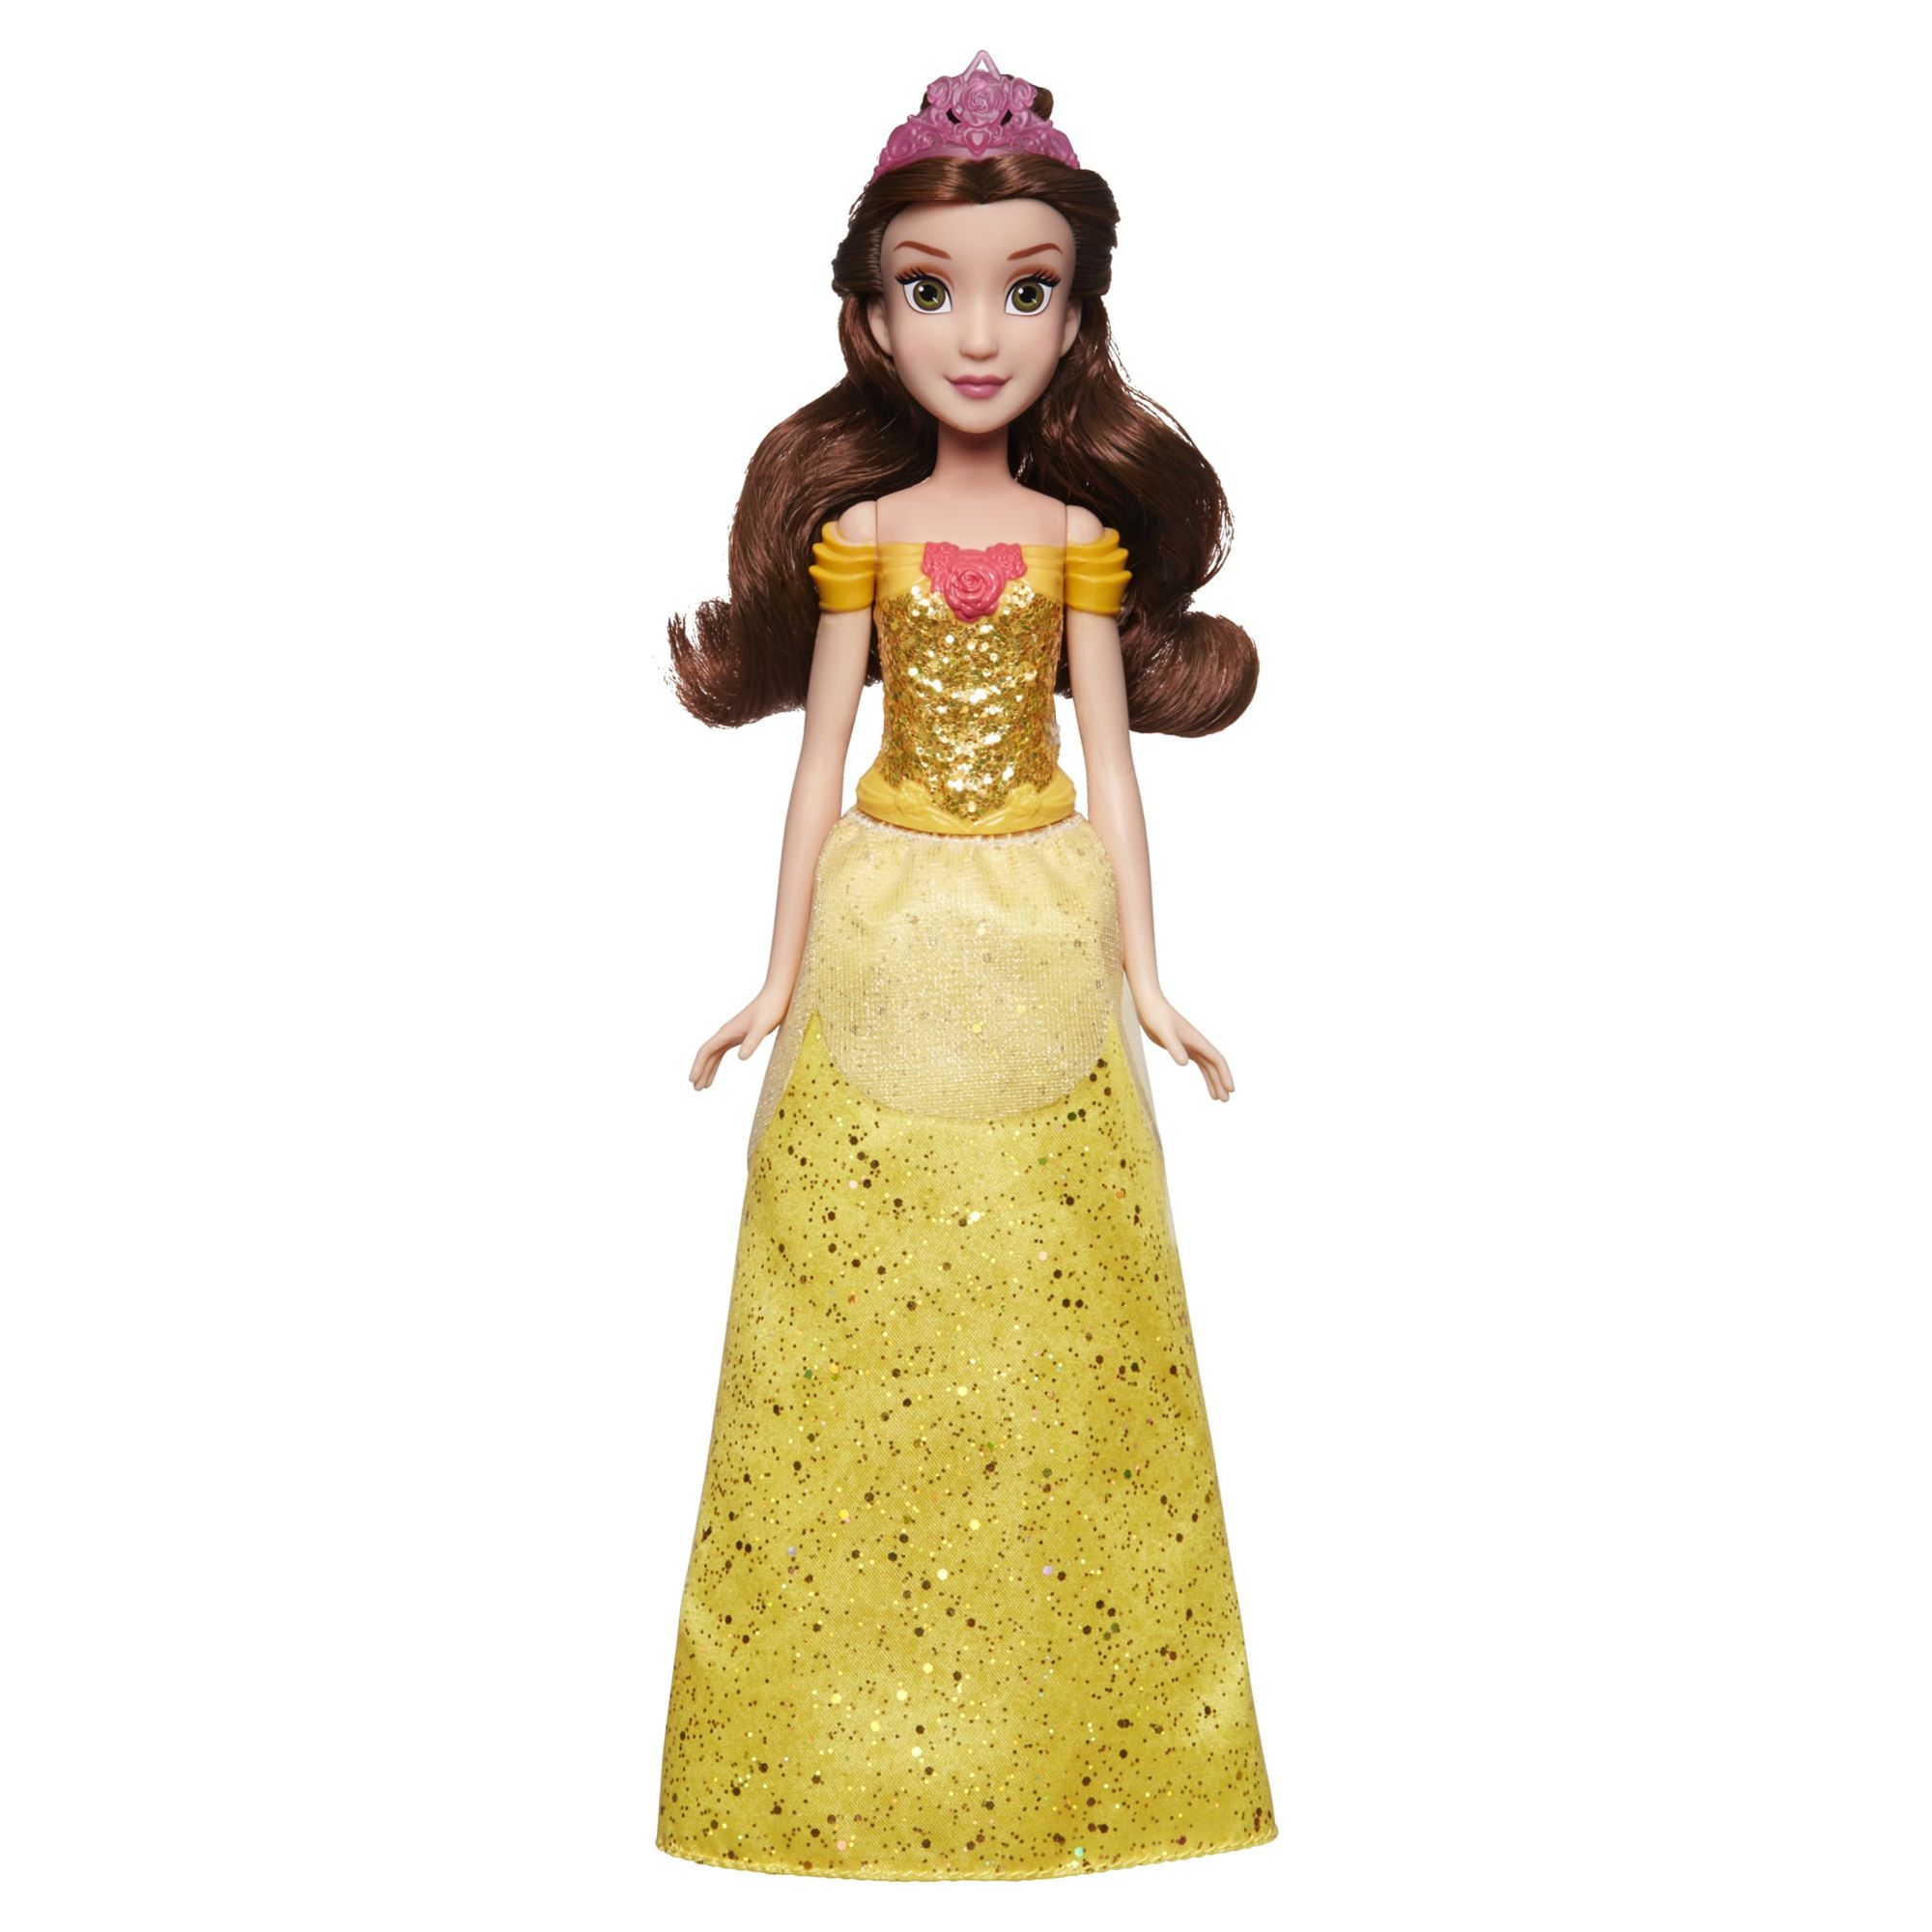 Disney Princess Royal Shimmer Belle with Sparkly Skirt, Includes Tiara and Shoes - image 1 of 16